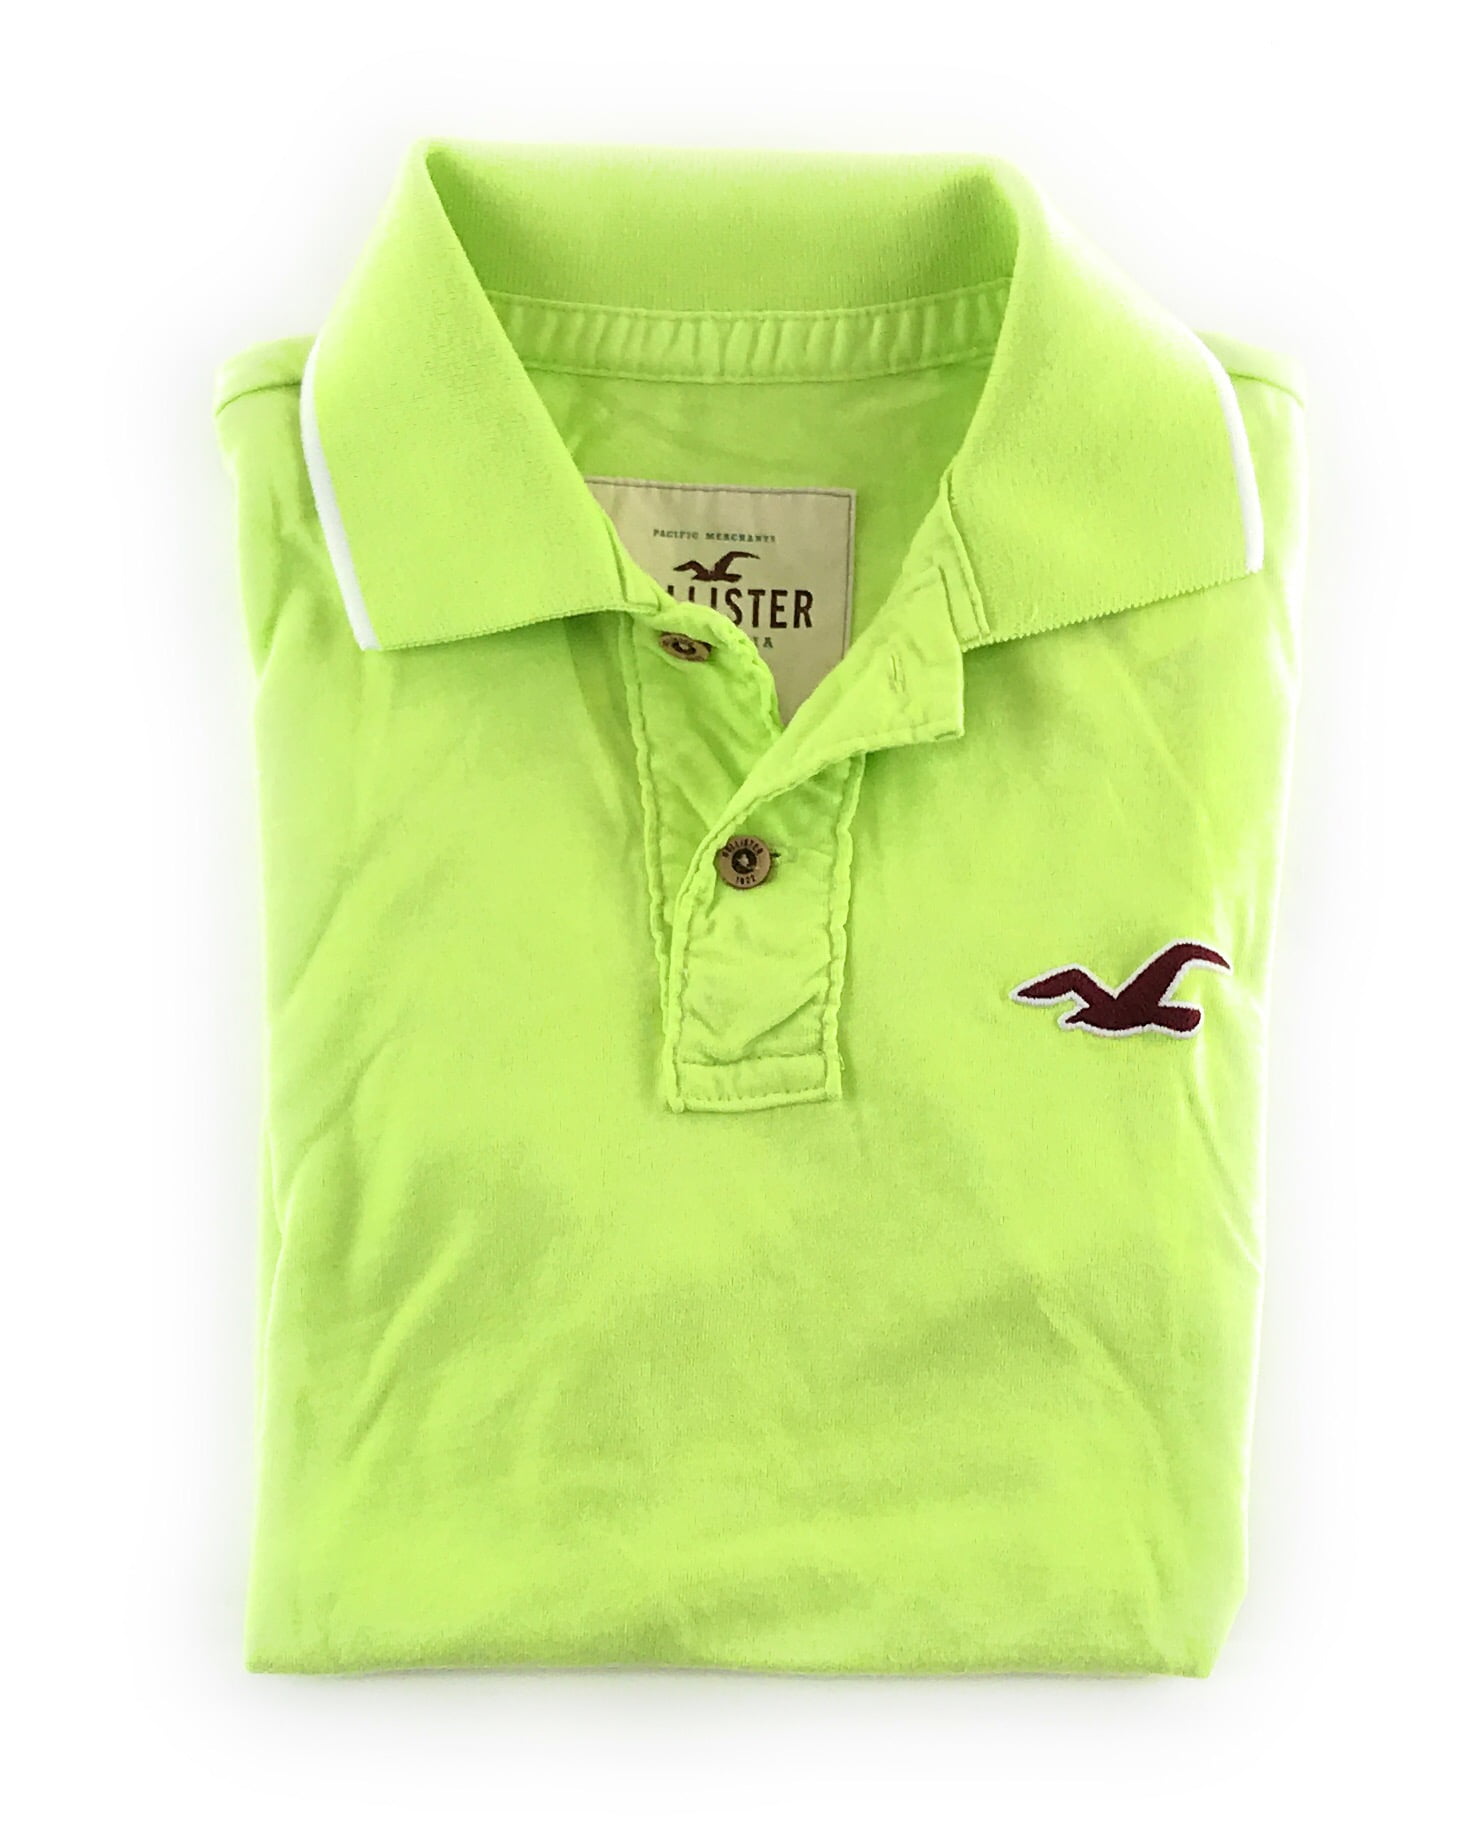 hollister polo shirts for men